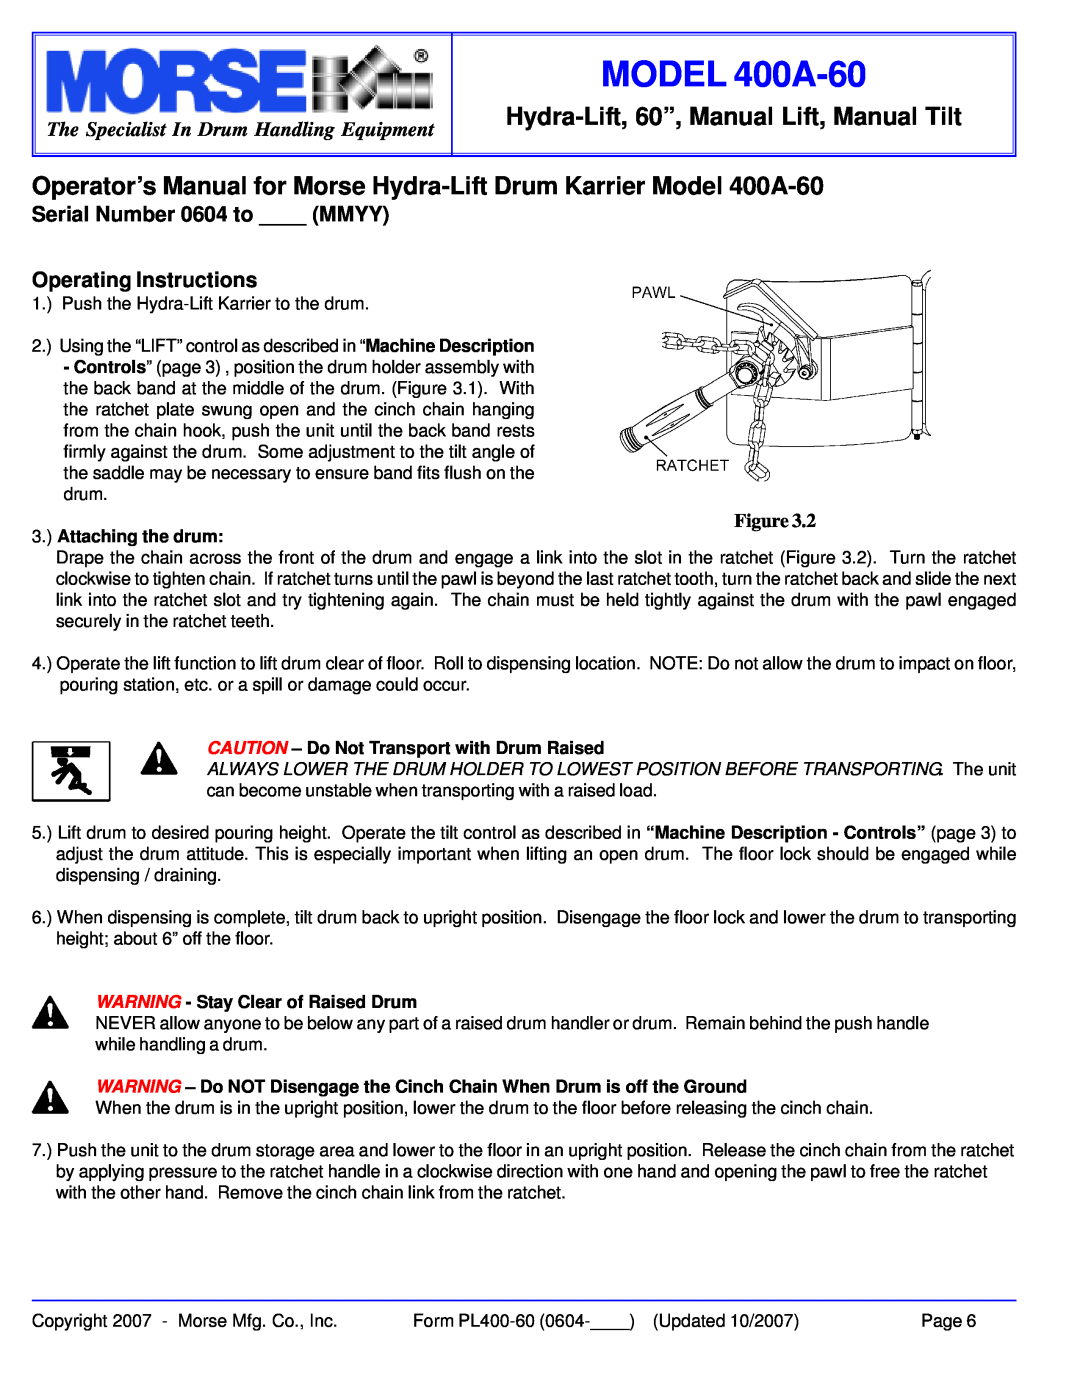 HydroSurge warranty Serial Number 0604 to MMYY Operating Instructions, Attaching the drum, MODEL 400A-60 